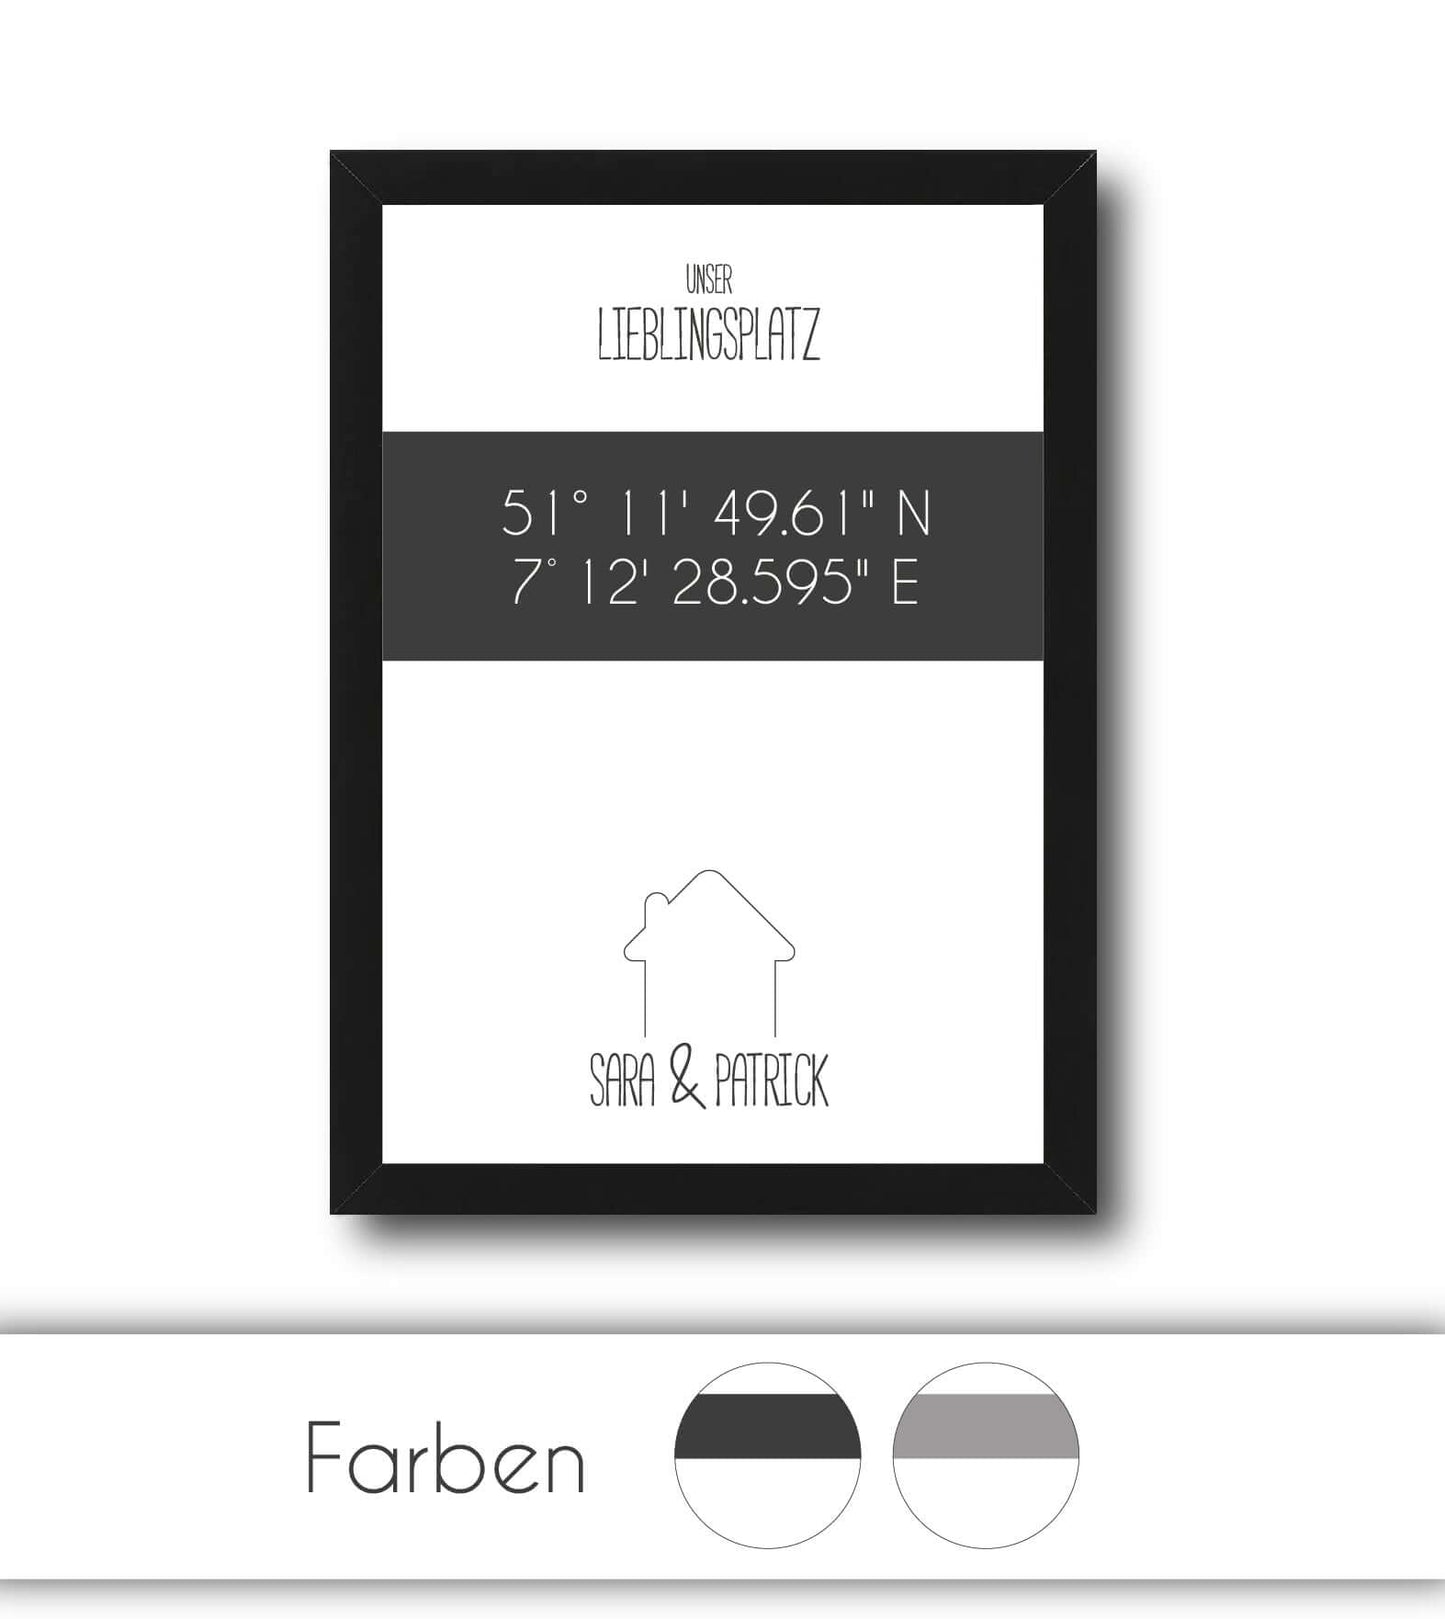 Personalized coordinate picture "Favorite Place" - House